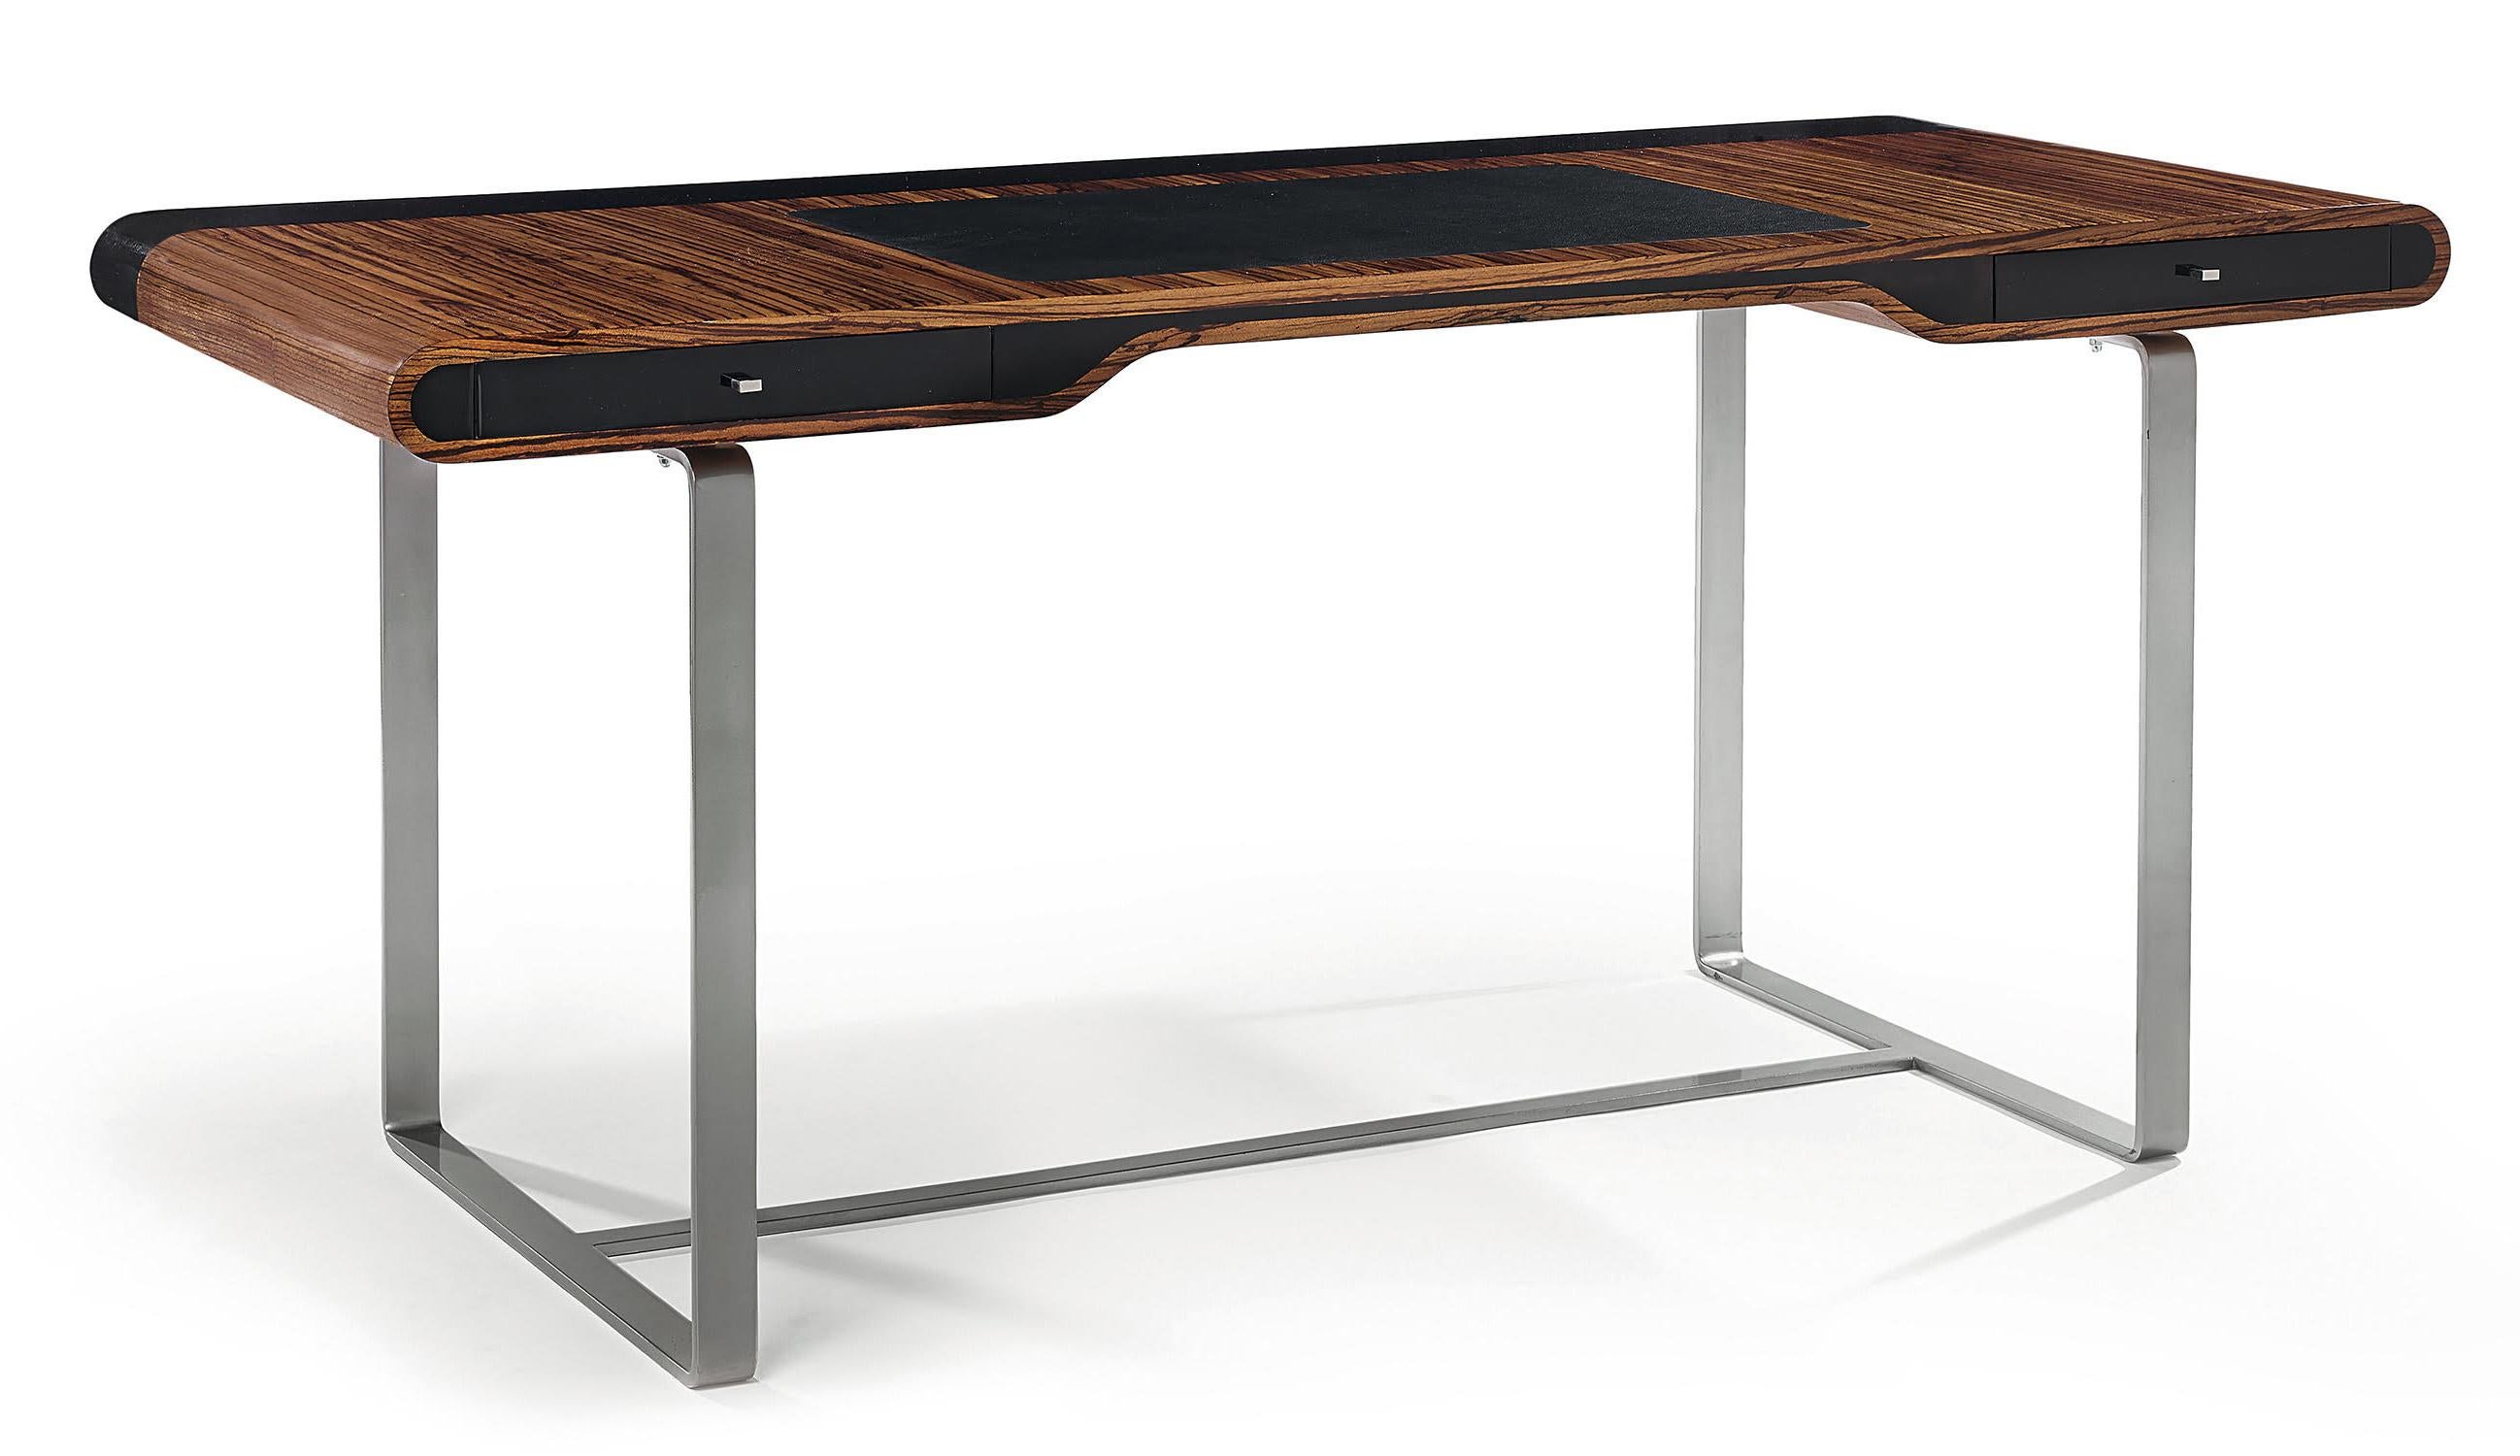 Contemporary Little Shanghai Desk in Zebrano Wood and Black Sycomore Silver Painted Leg